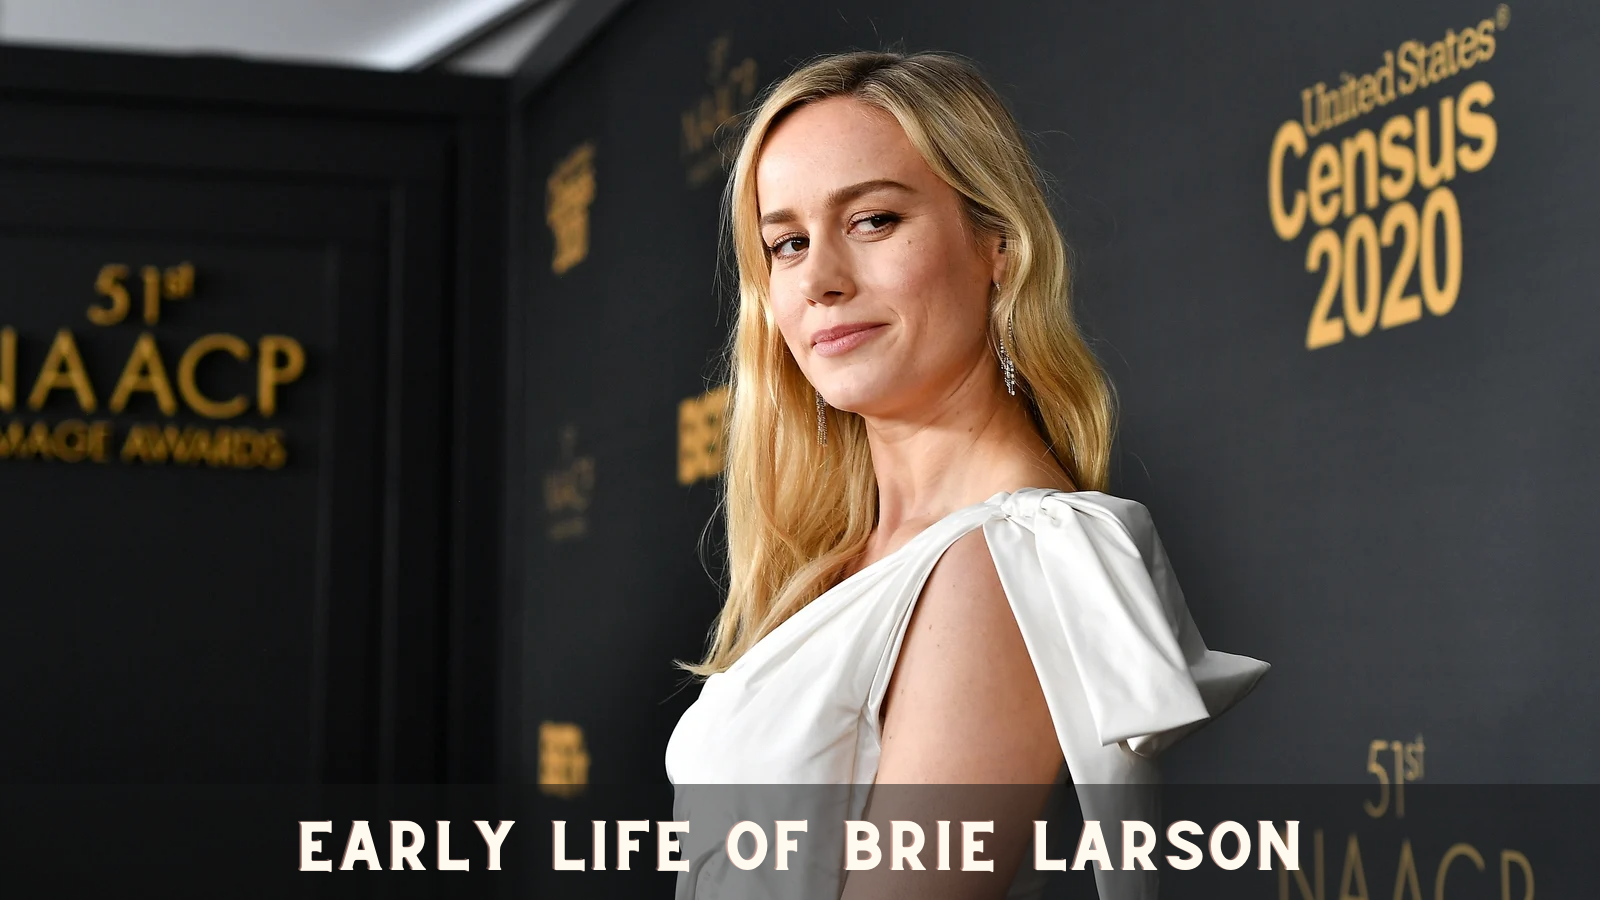 Early Life of Brie Larson